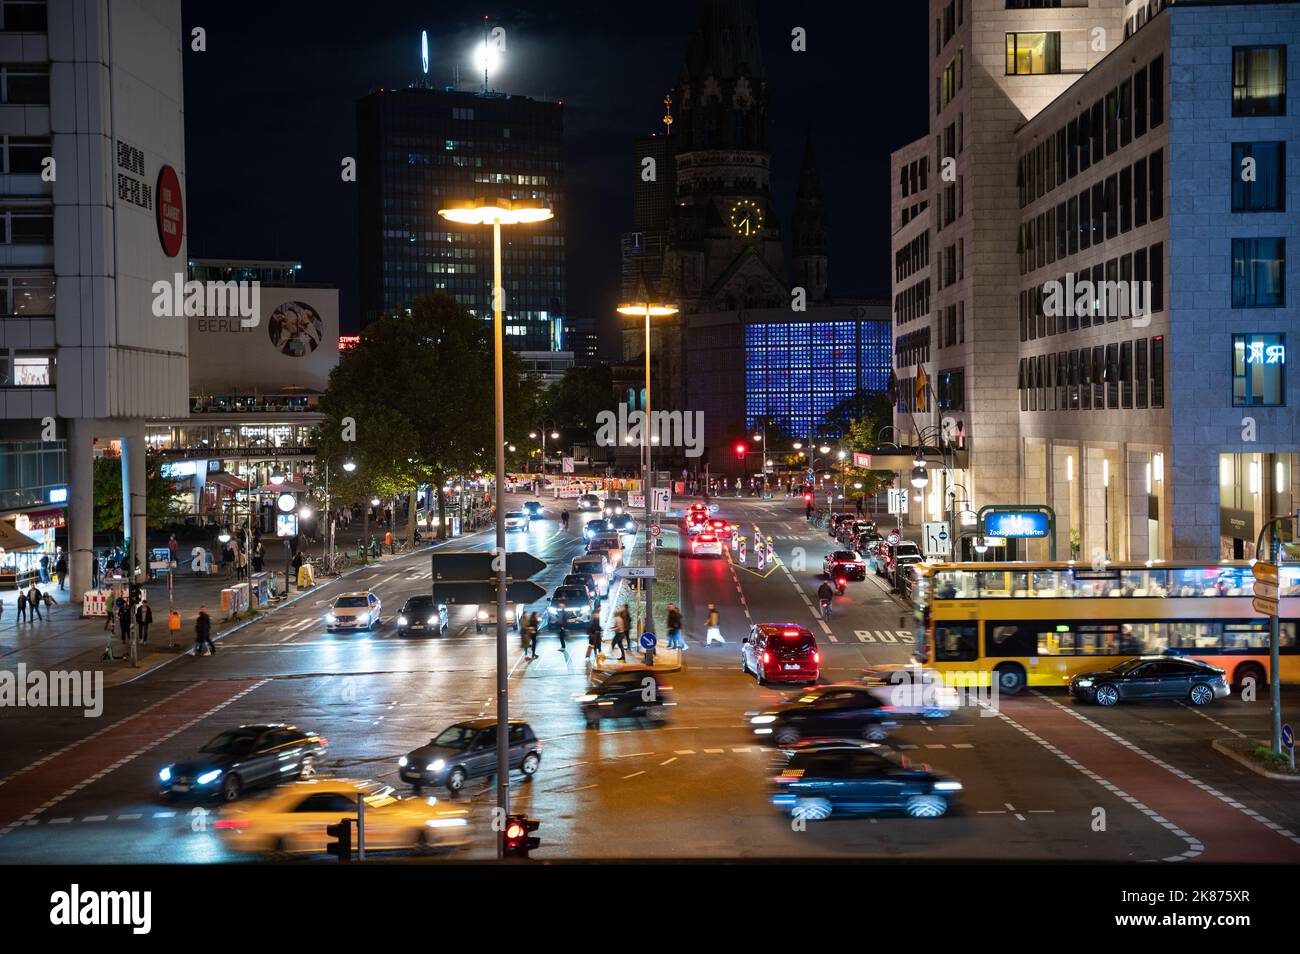 07.10.2022, Berlin, Germany, Europe - View of evening traffic at Hardenbergplatz square in district of Charlottenburg as seen from Bahnhof Zoo station. Stock Photo